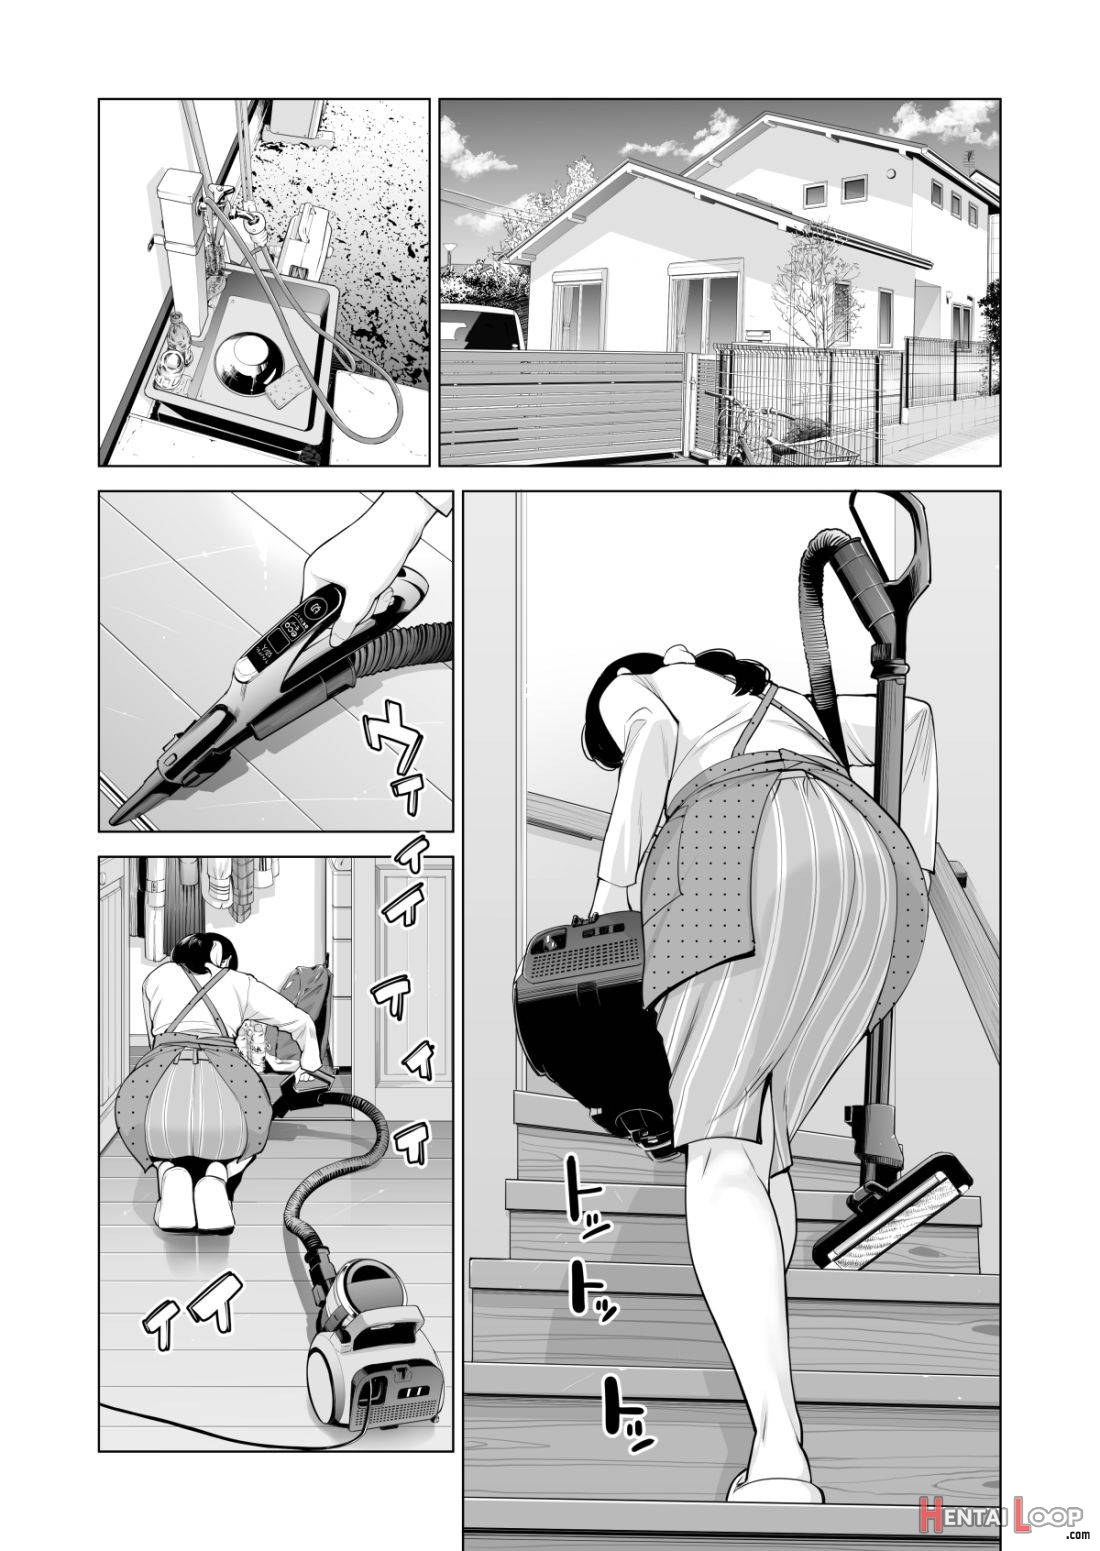 Tsukiyo no Midare Zake (Zenpen) Moonlit Intoxication ~ A Housewife Stolen by a Coworker Besides her Blackout Drunk Husband ~ Chapter 1 page 11